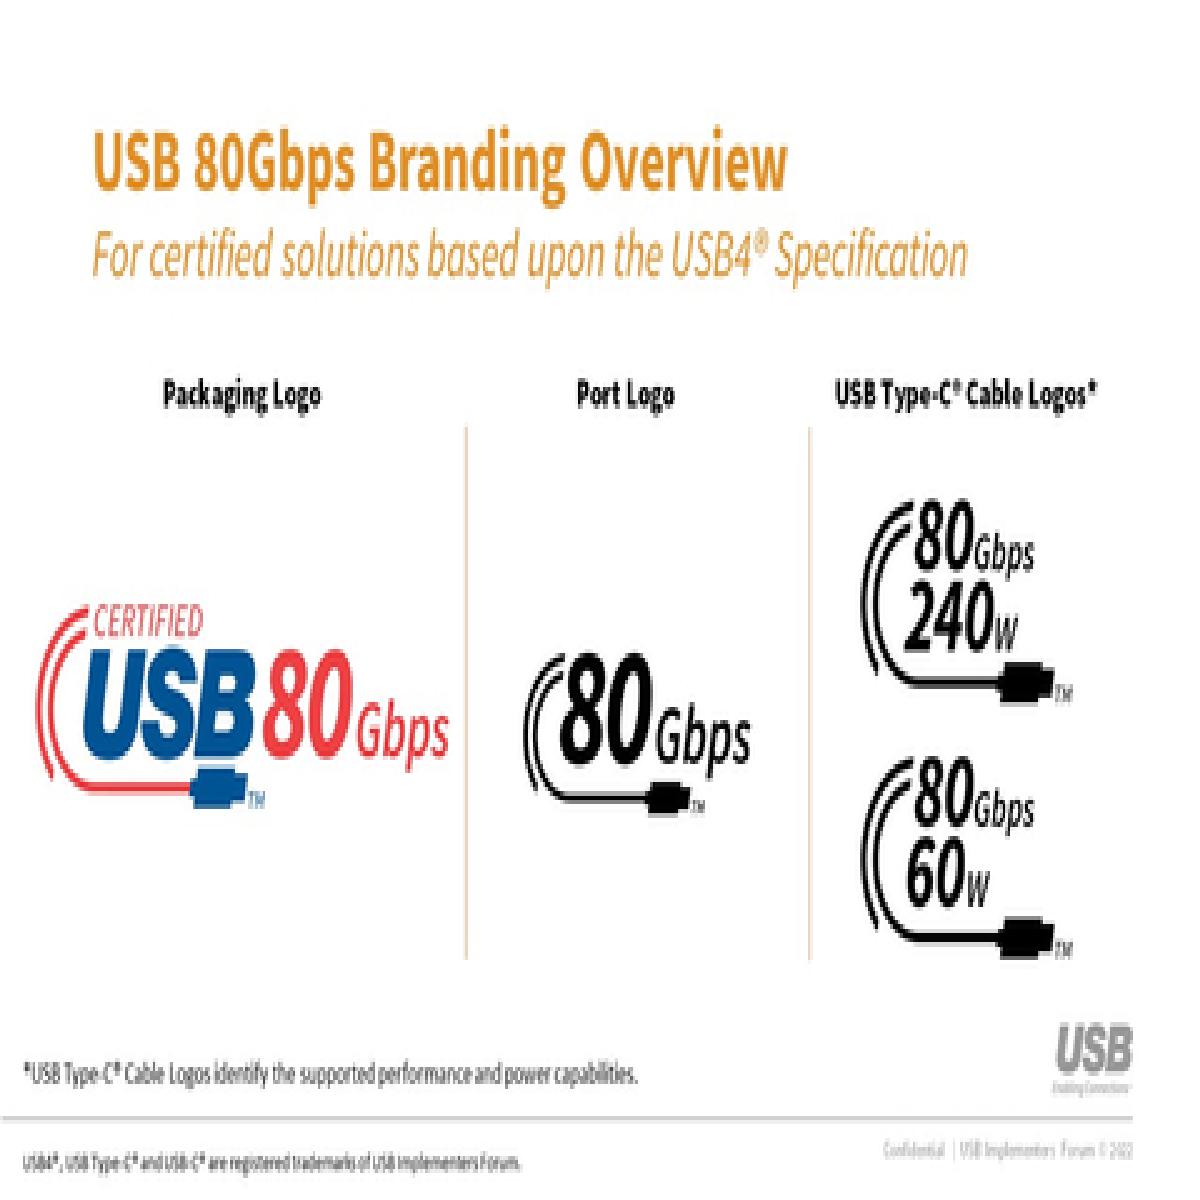 USB-IF Announces Publication of New USB4® Specification to Enable USB 80Gbps Performance